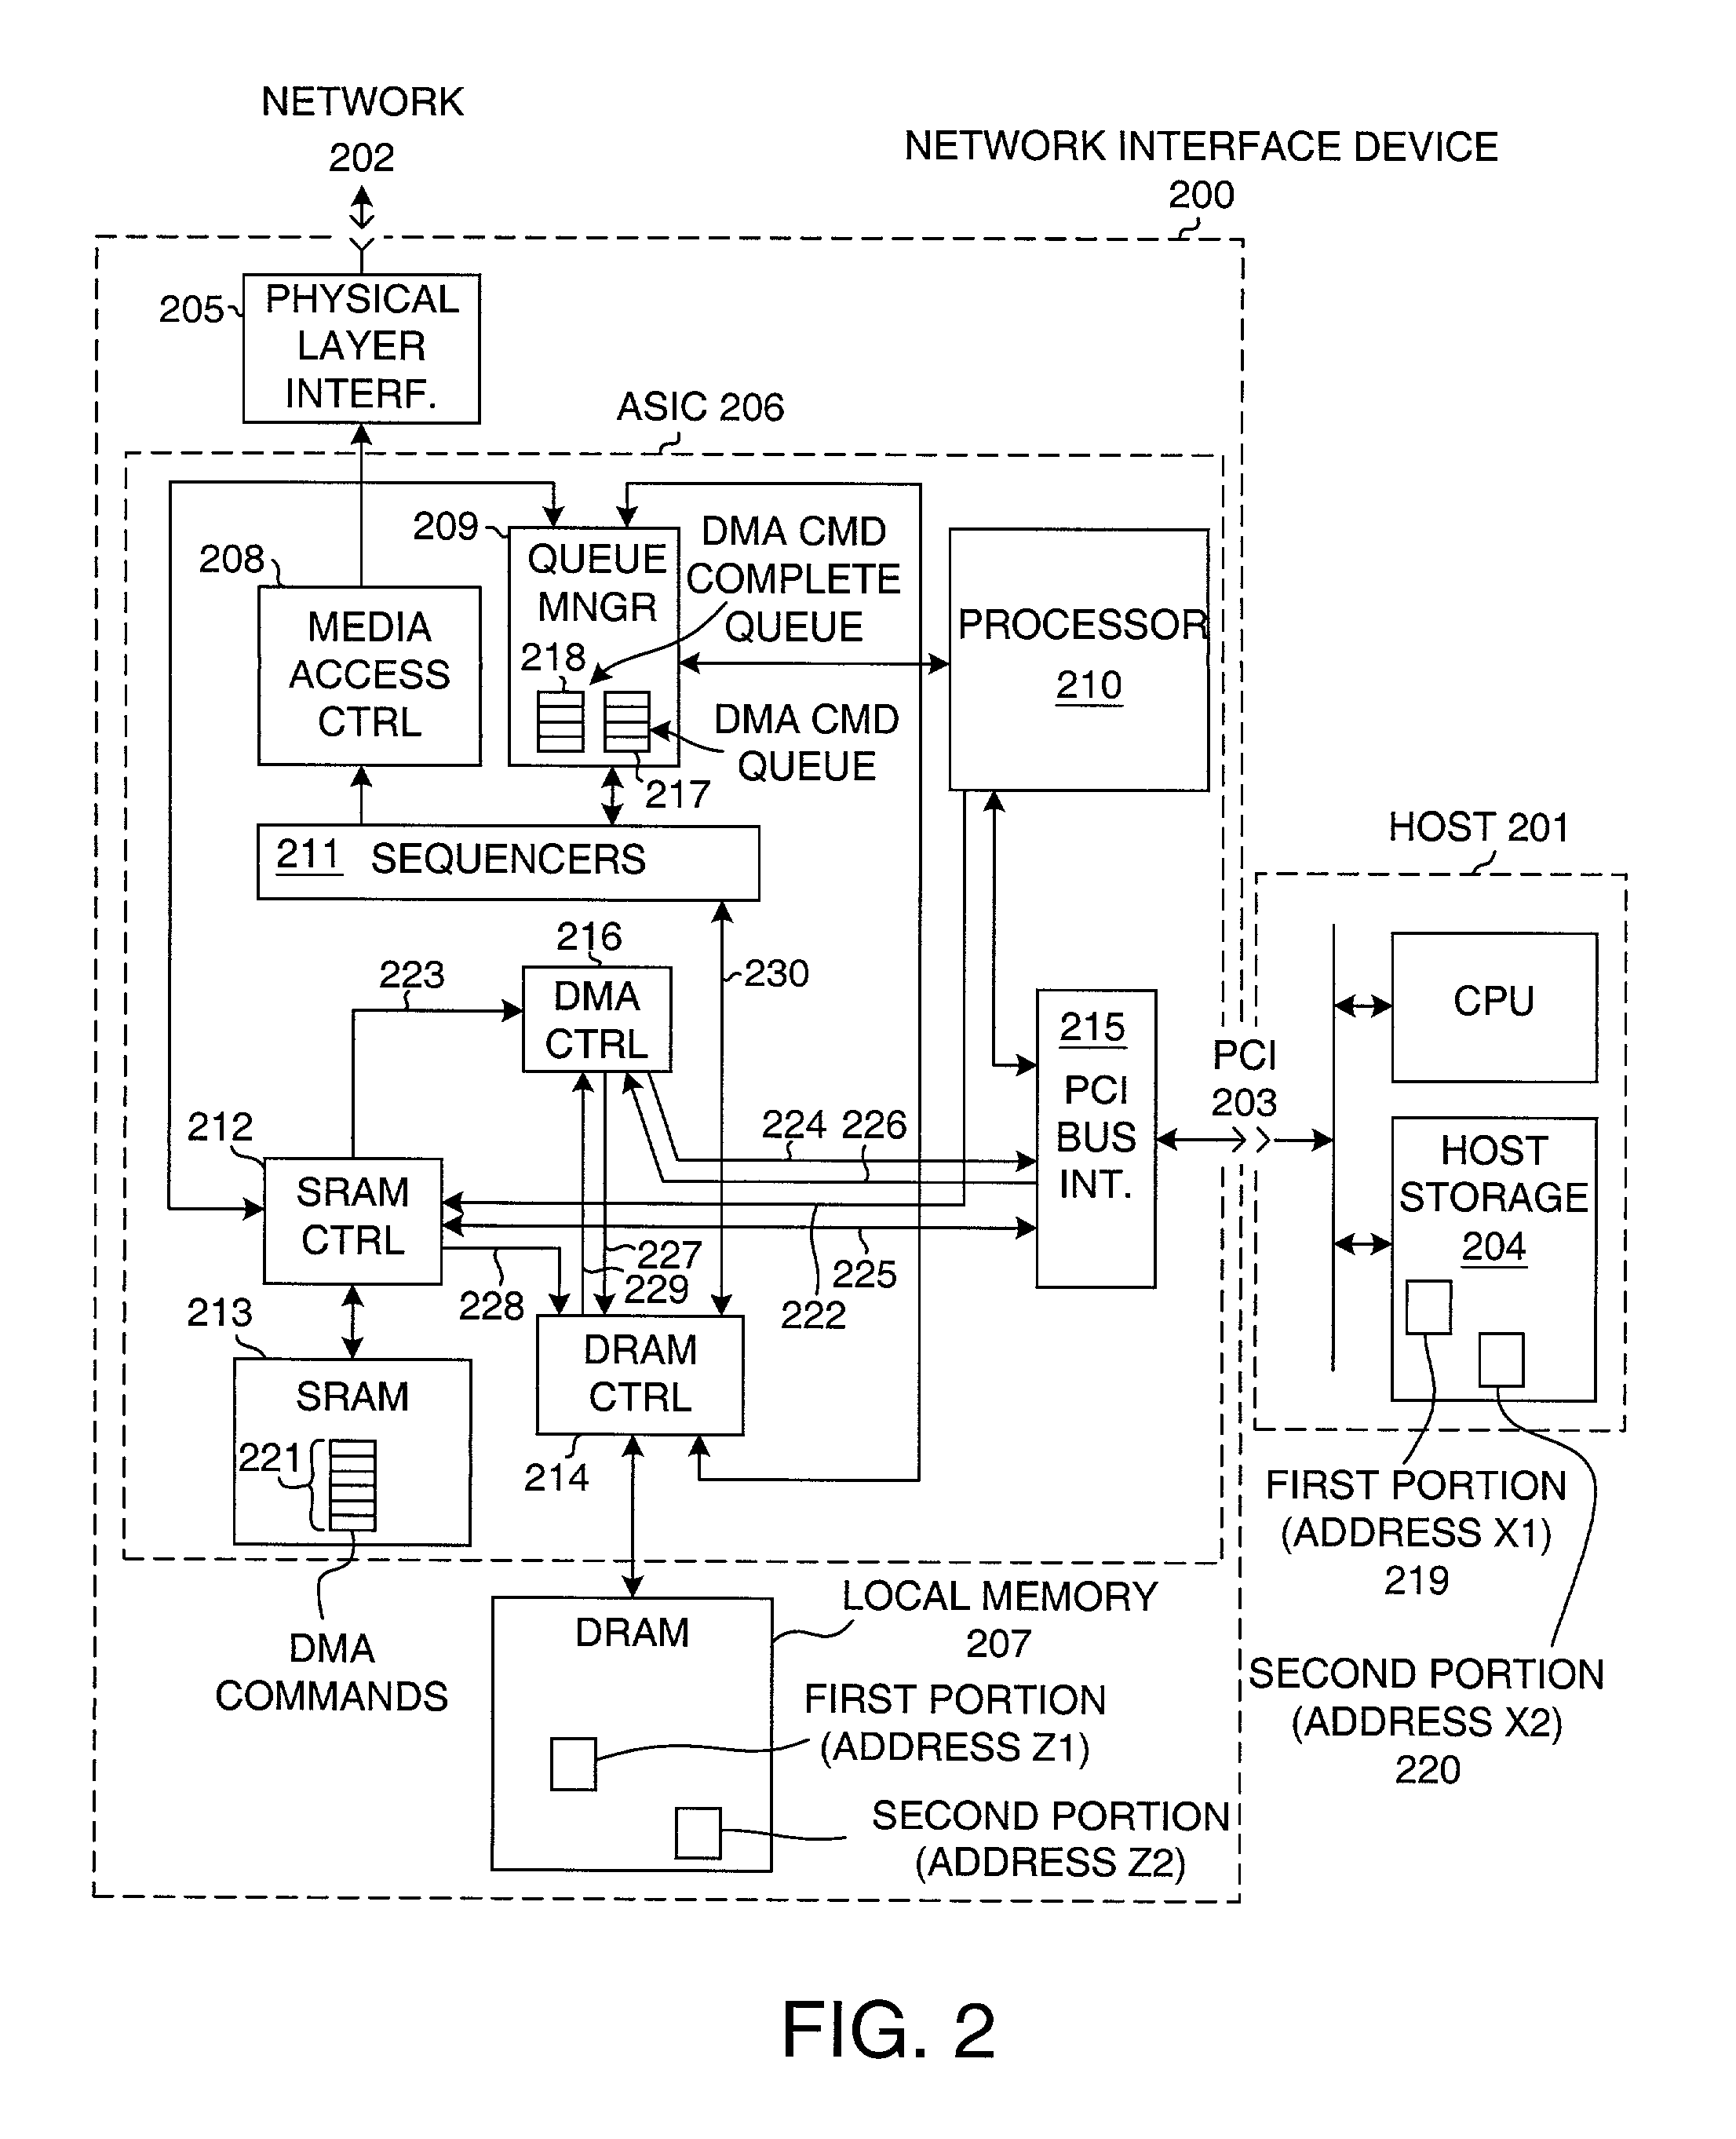 Network interface device employing a DMA command queue